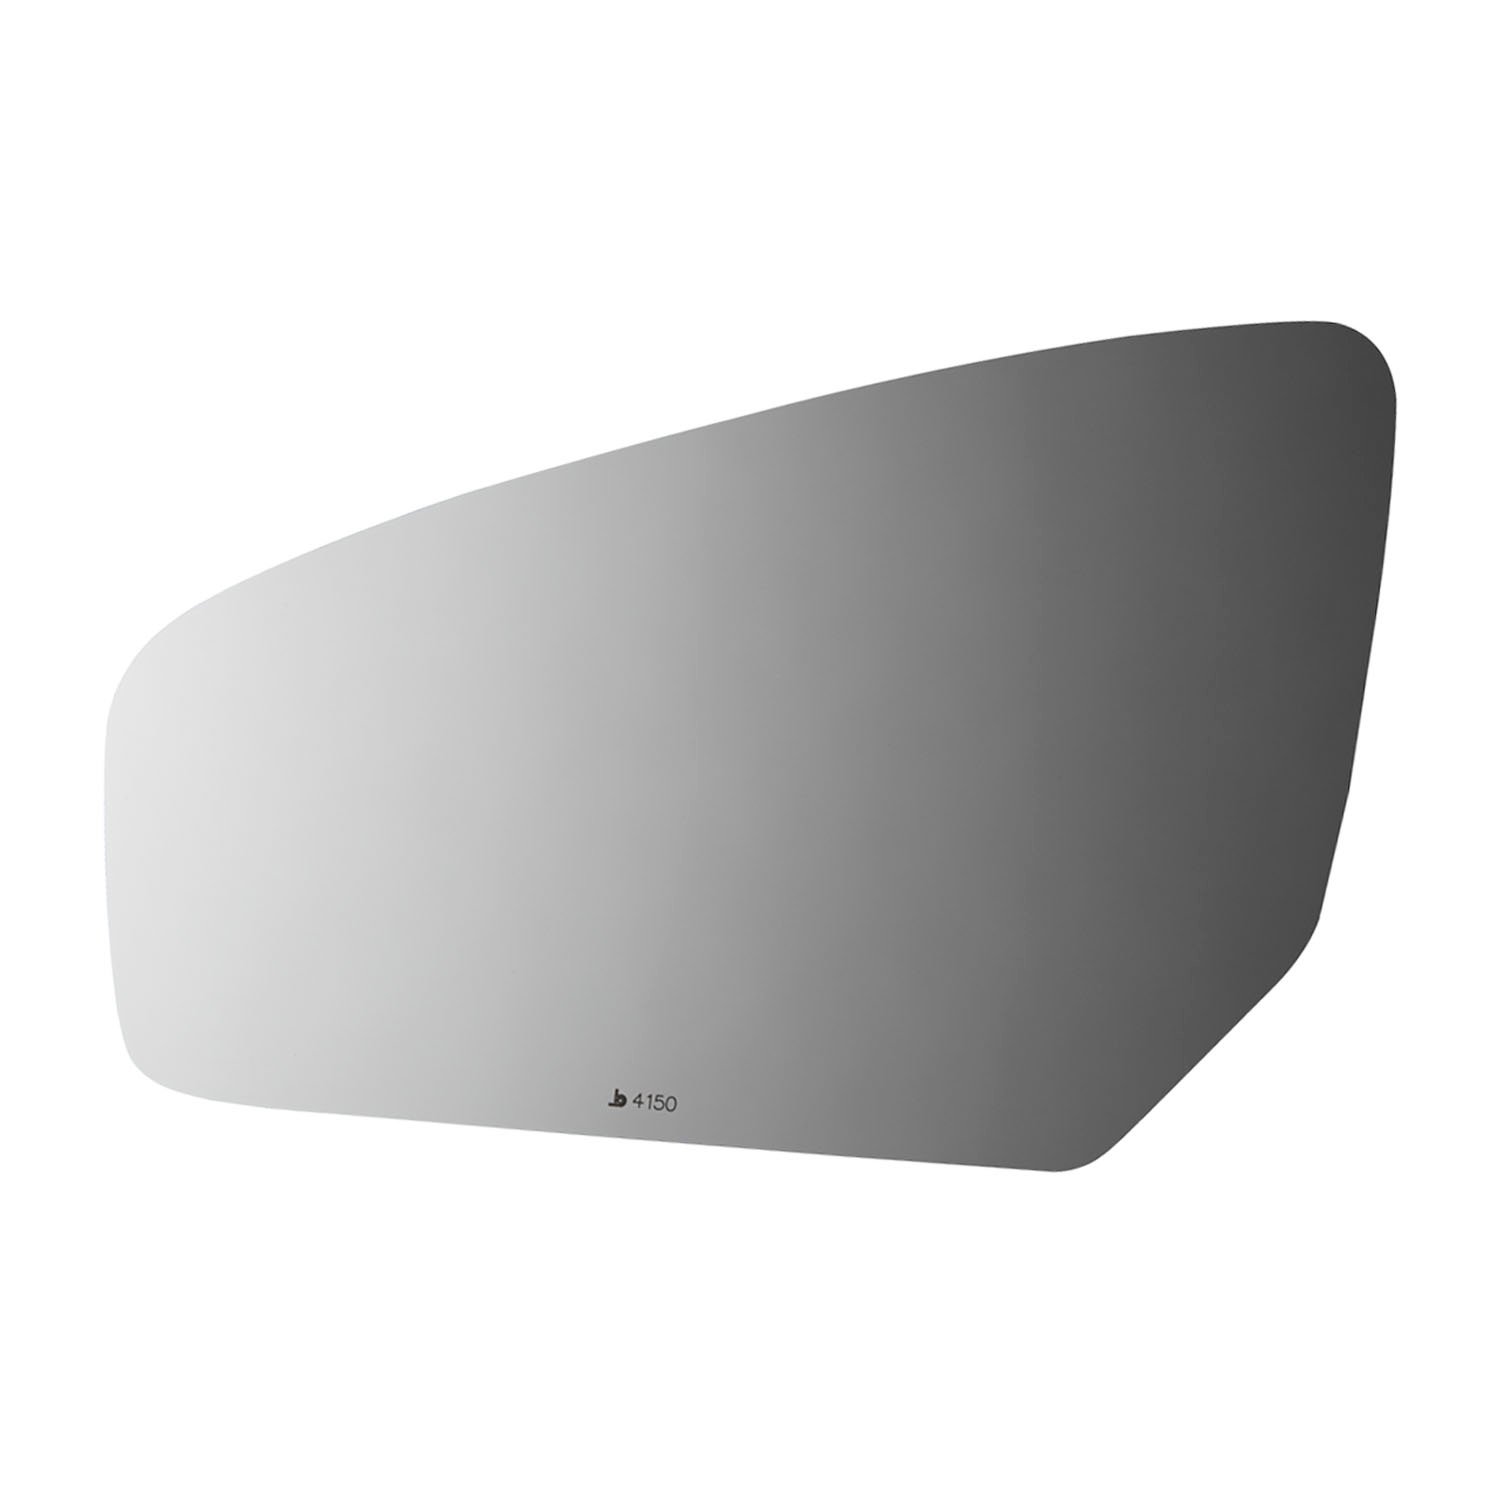 4150 SIDE VIEW MIRROR